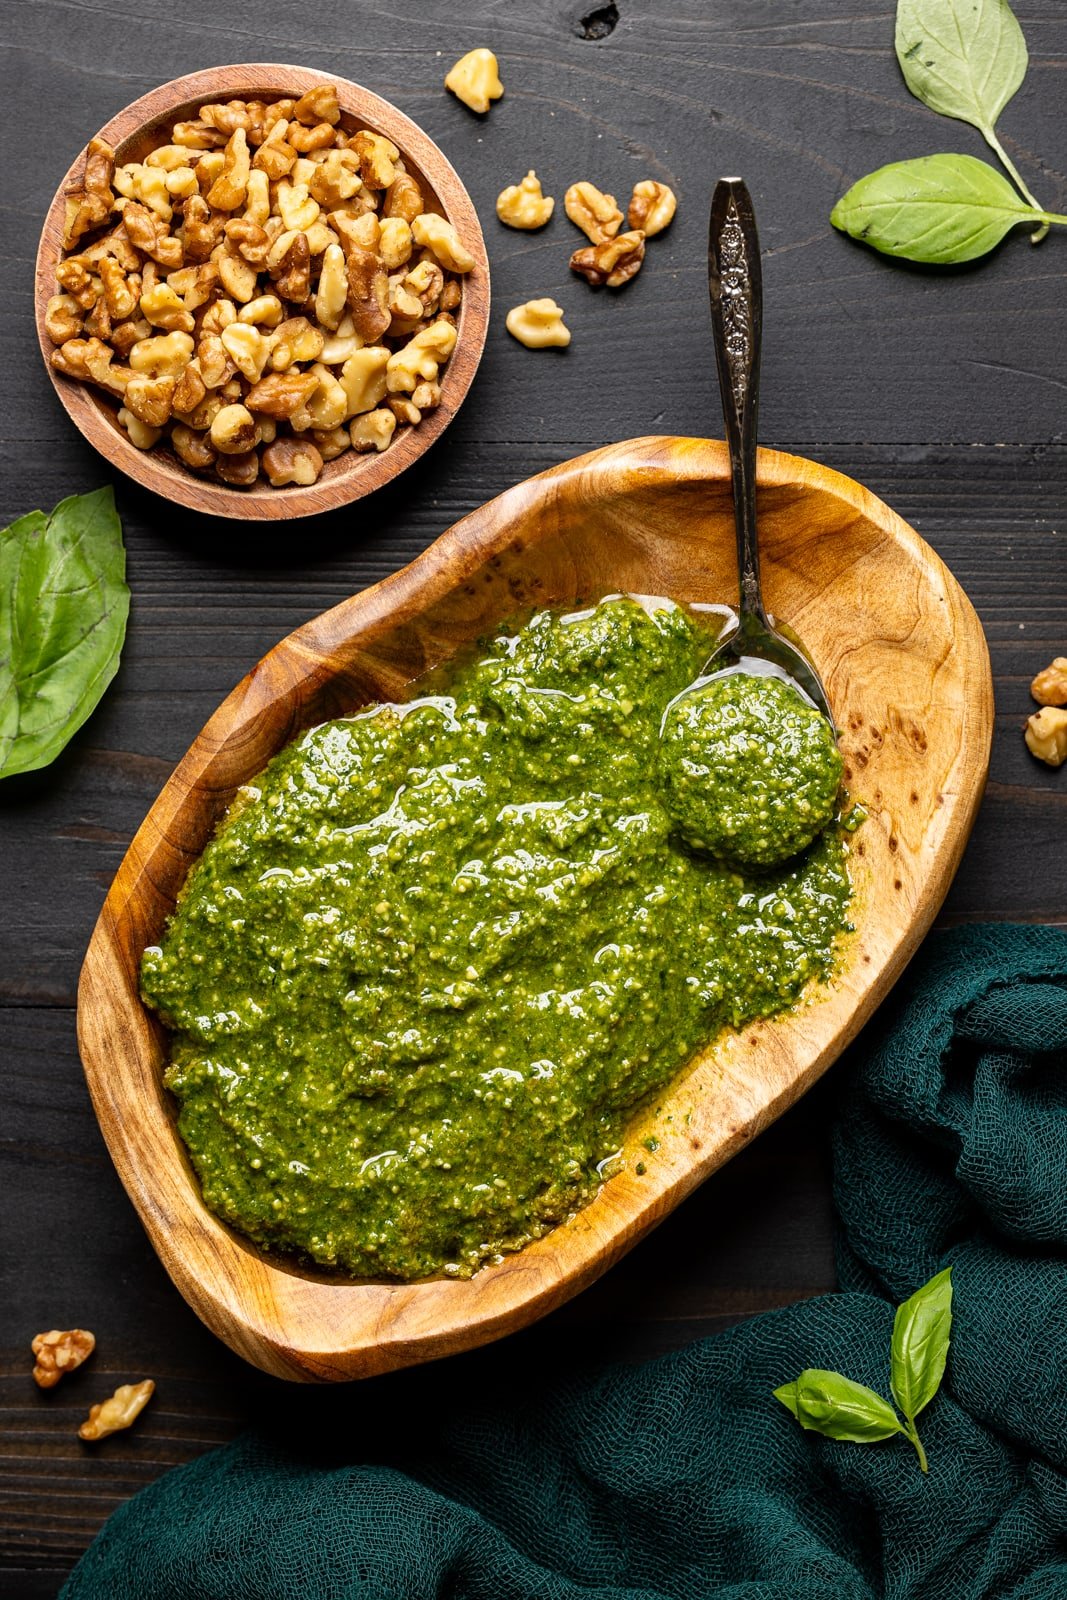 Pesto sauce in a brown wood bowl on a black wood table with walnuts and basil leaves.